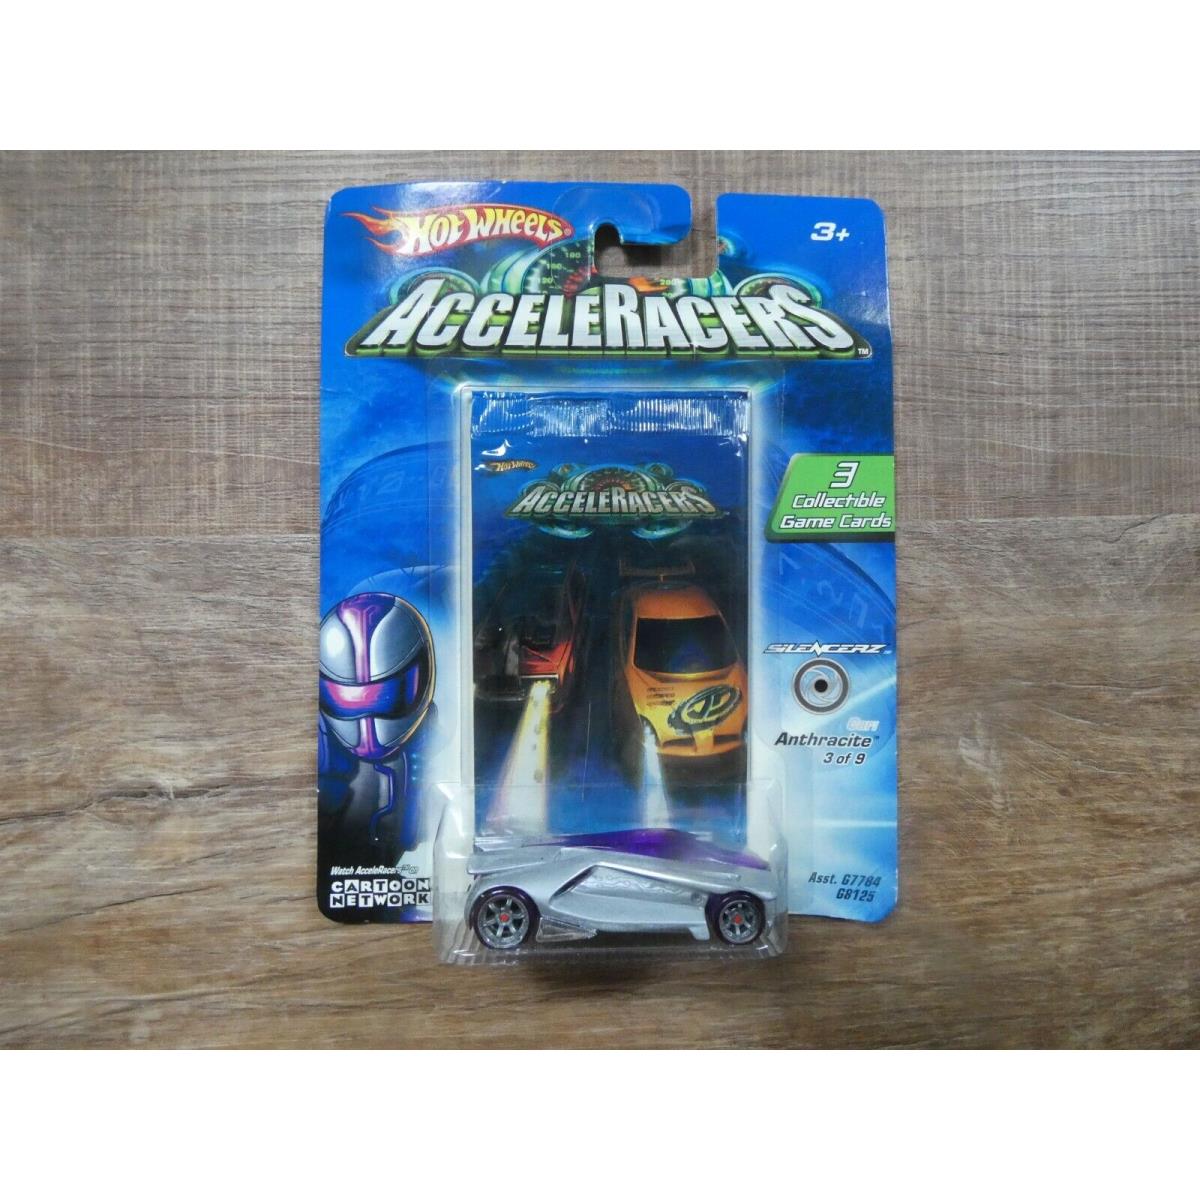 Hot Wheels Acceleracers Silencerz Anthracite 3 of 9